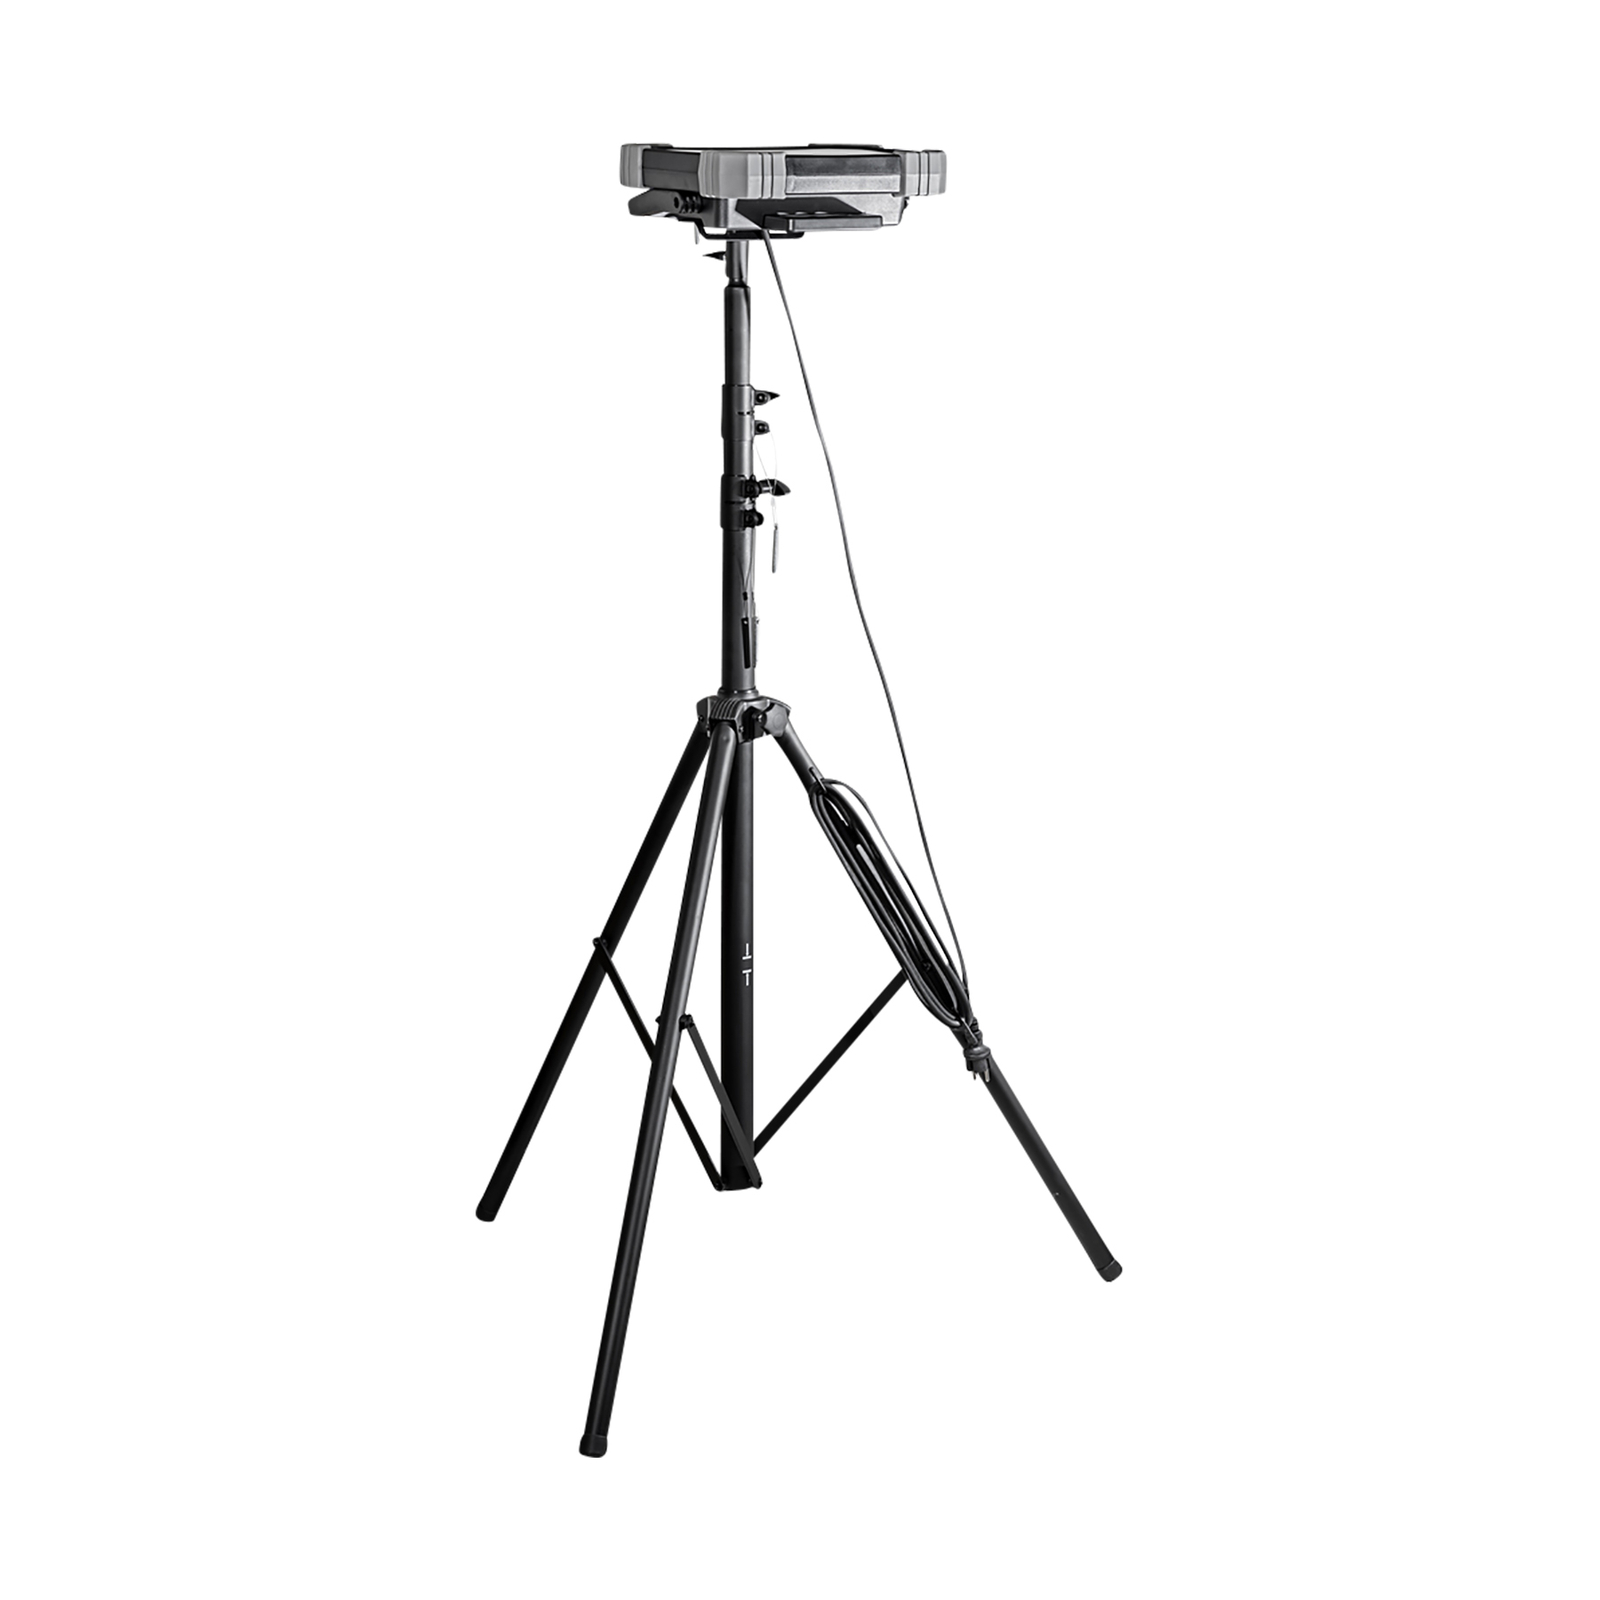 TS 300 telescopic stand for R23050 floodlight